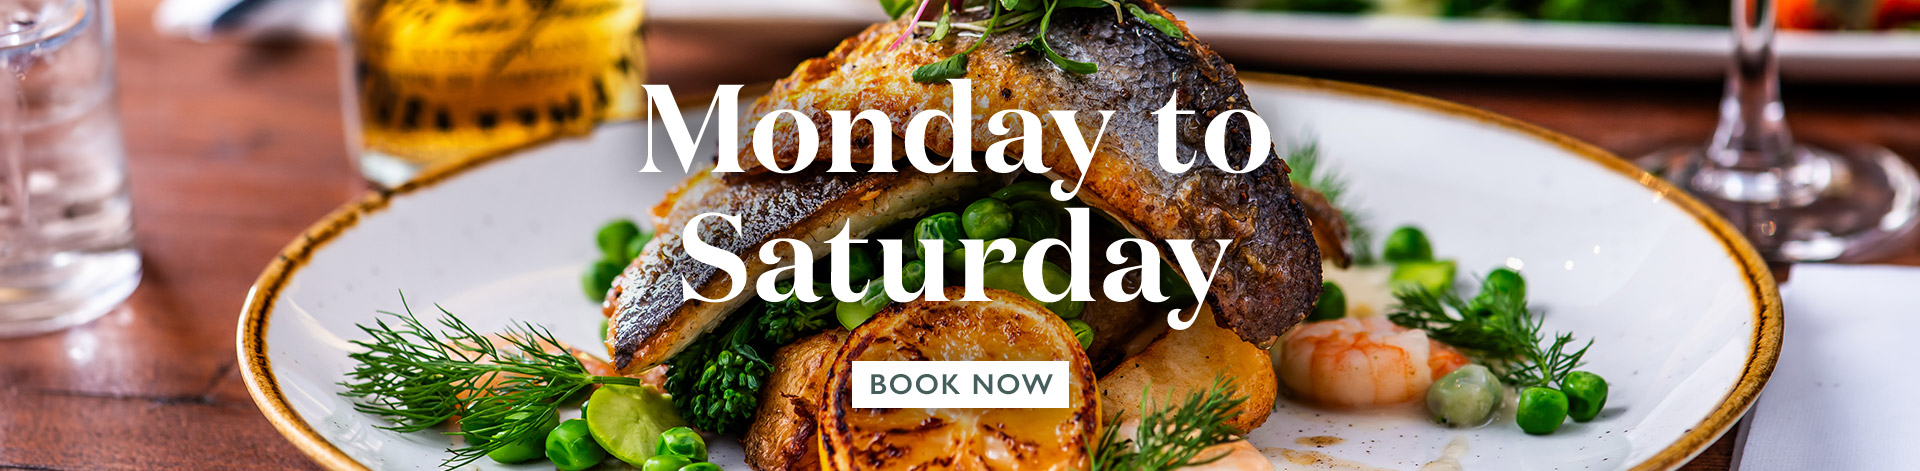 Book now at The Cuckoo